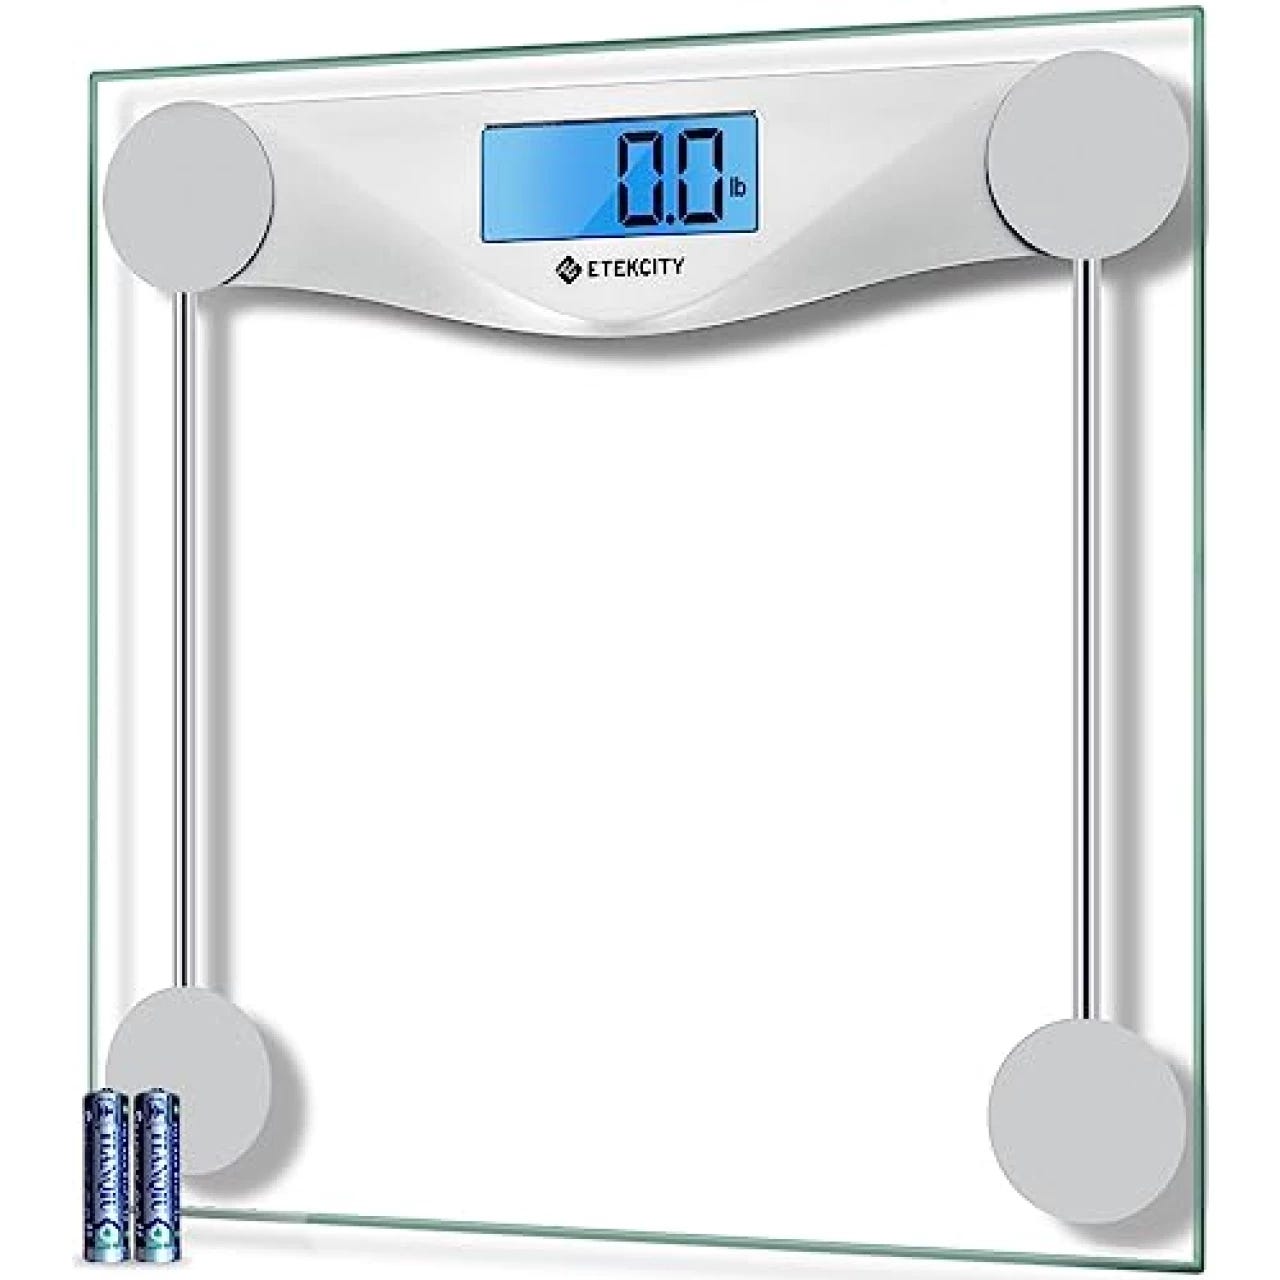 Scale for Body Weight and Fat Percentage, Bveiugn Digital Accurate Bathroom  S